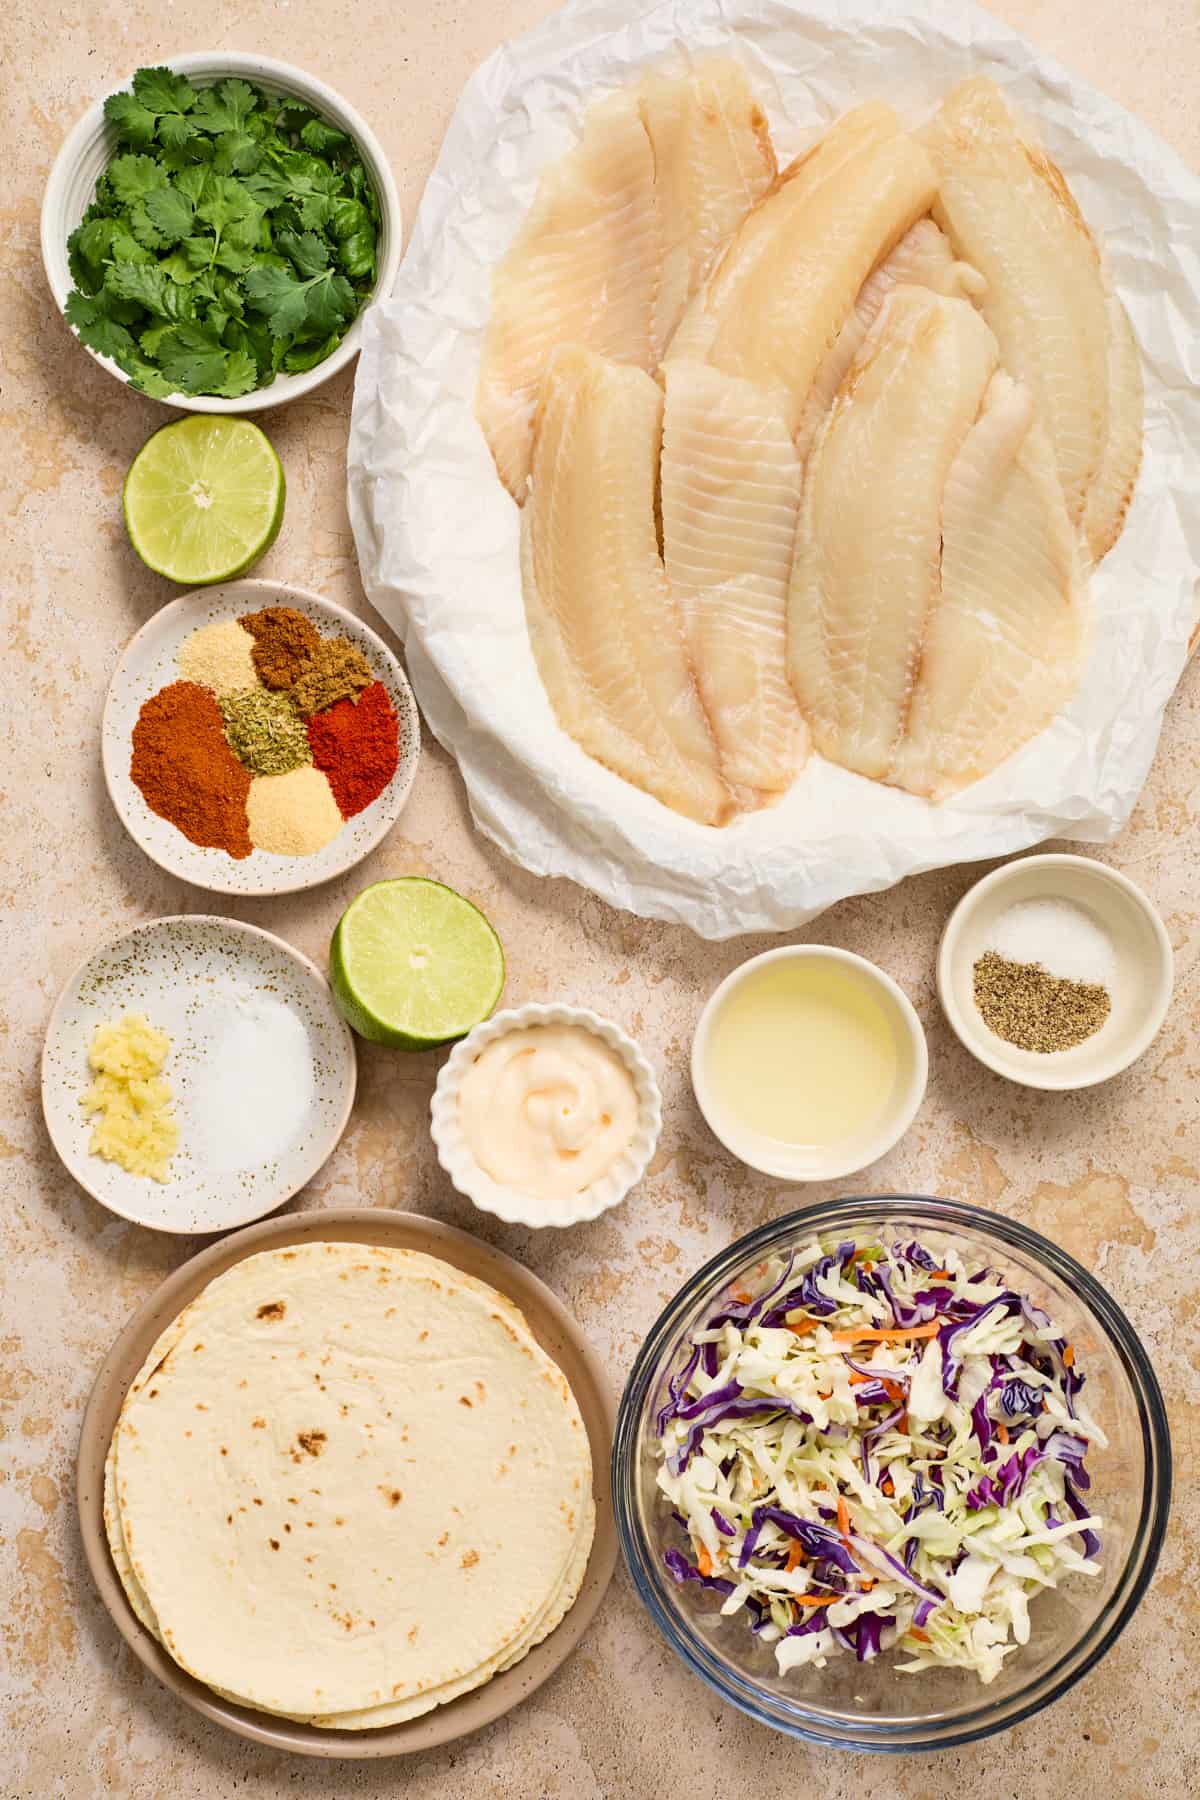 Fish, tortillas, slaw, spices and other ingredients labeled on a counter.